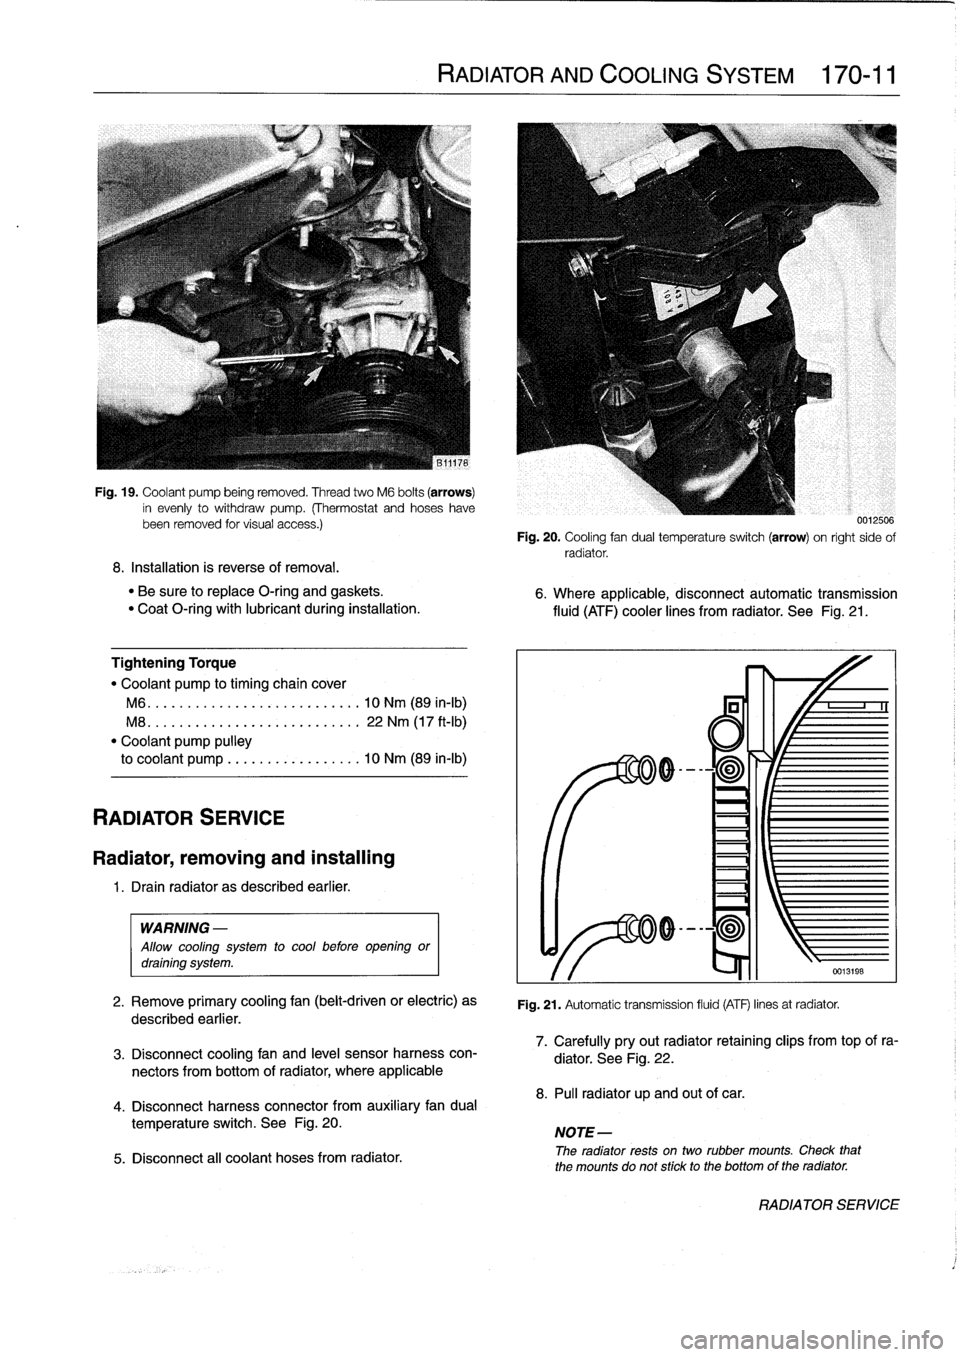 BMW 323i 1998 E36 Workshop Manual 
Fig
.
19
.
Coolant
pump
being
removed
.
Thread
two
M6
bolts
(arrows)
in
evenly
to
withdraw
pump
.
(Thermostat
and
hoseshavebeen
removed
tor
visual
access
.)

8
.
Installation
is
reverse
of
removal
.
